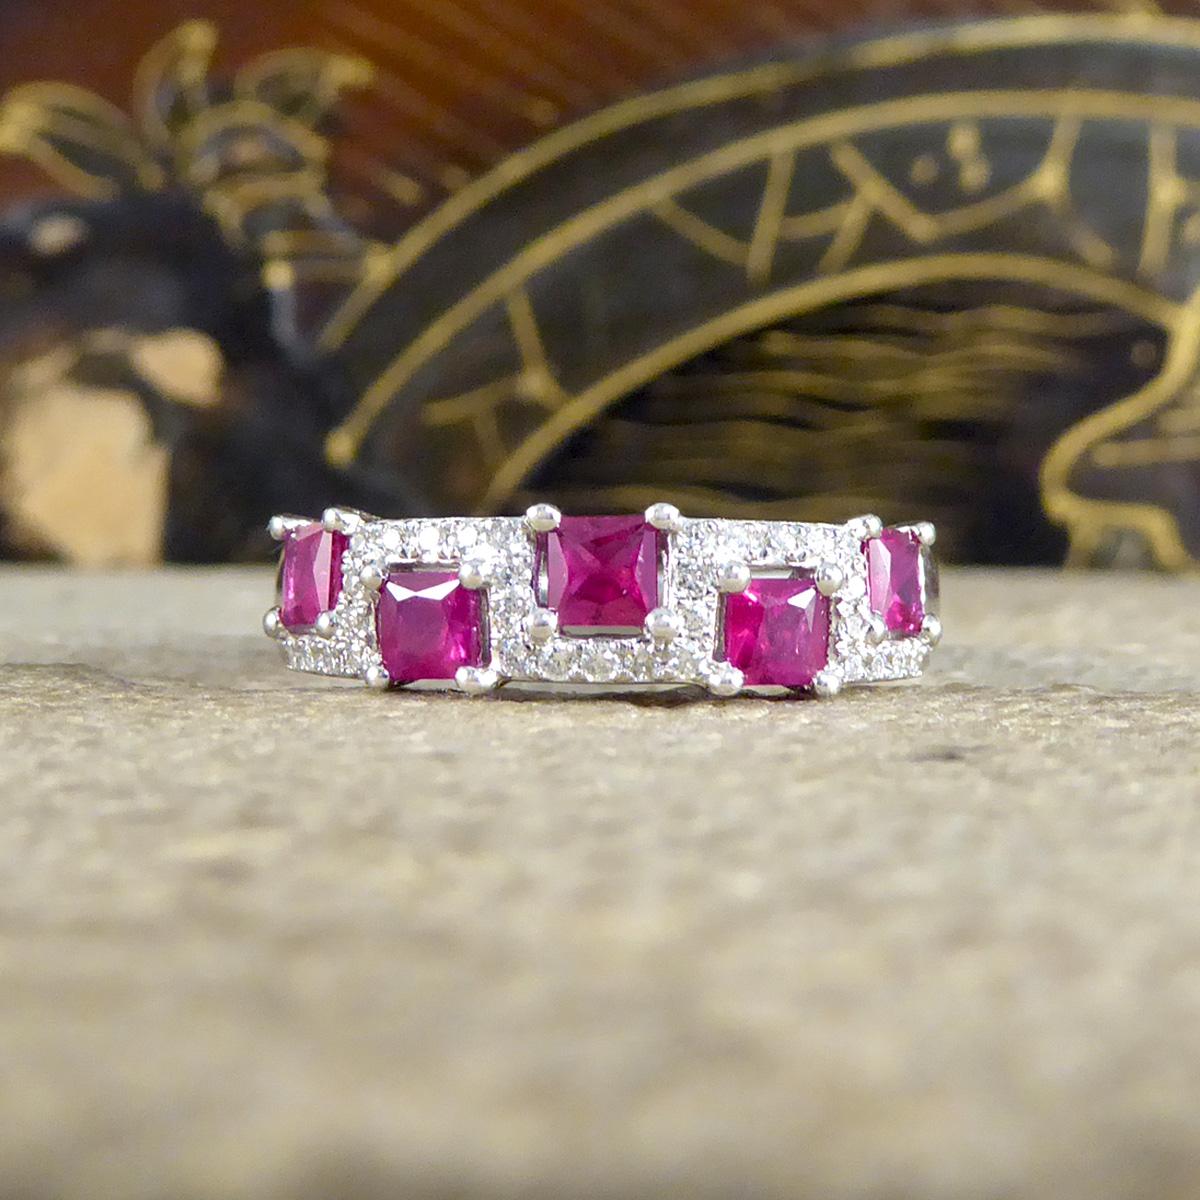 This lovely contemporary ring is the perfect style to be worn on its own or as a stackable ring. A beautiful half eternity ring with a difference! It sparkles across the whole face of the finger with square cut Rubies weighing 0.12ct each